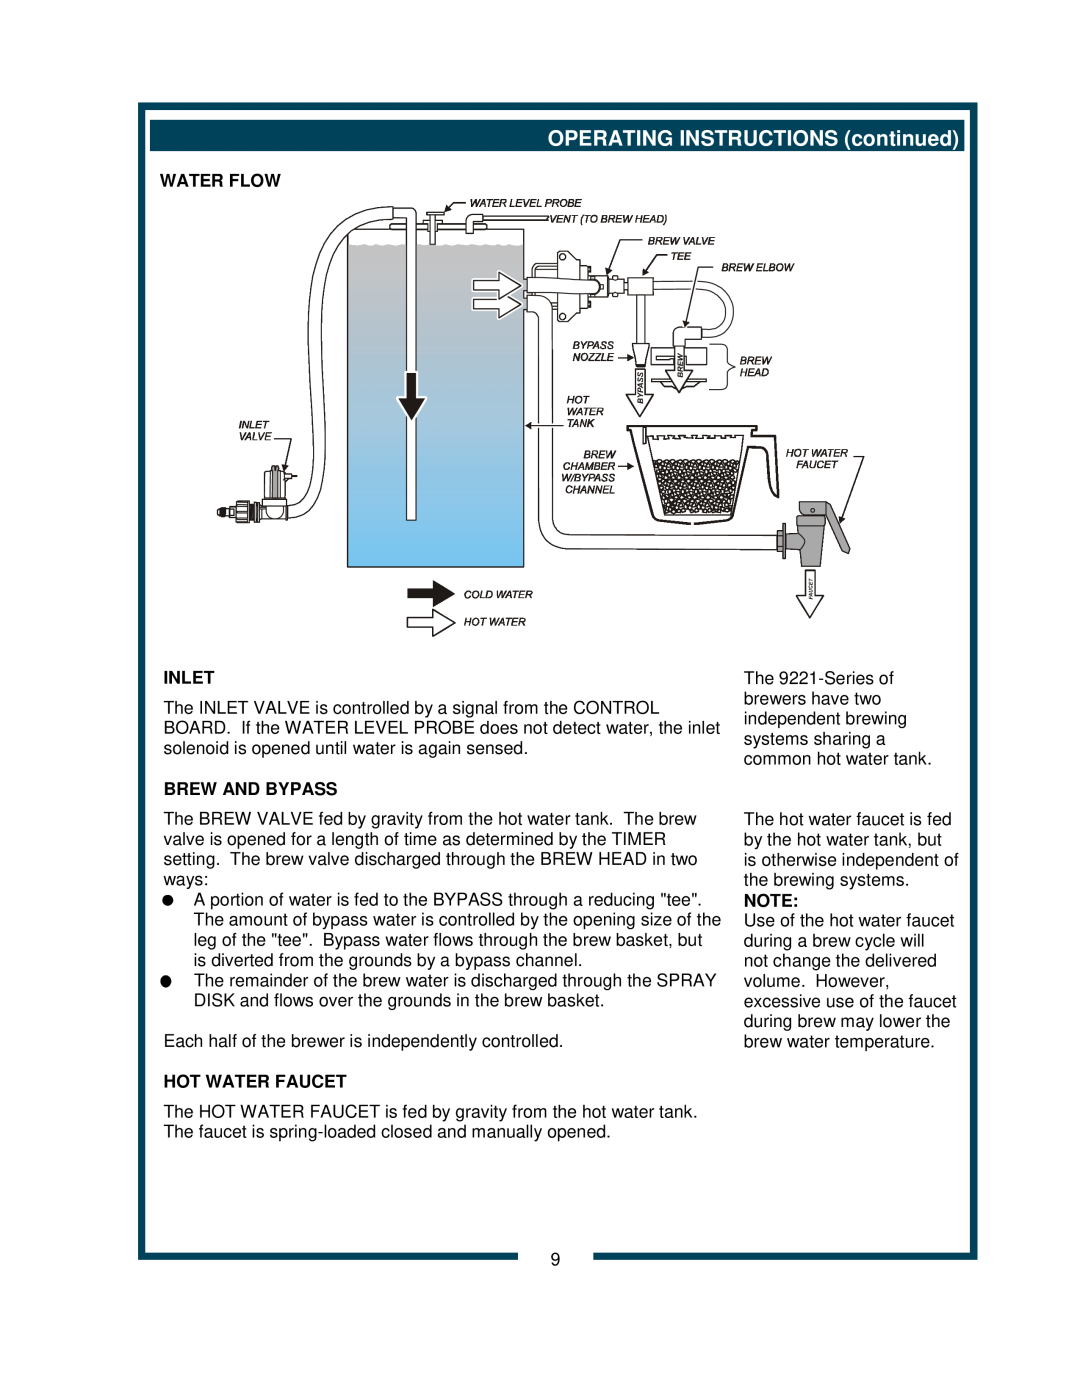 Bloomfield 9220 9221 owner manual OPERATING INSTRUCTIONS continued, Water Flow, Inlet, Brew And Bypass, Hot Water Faucet 